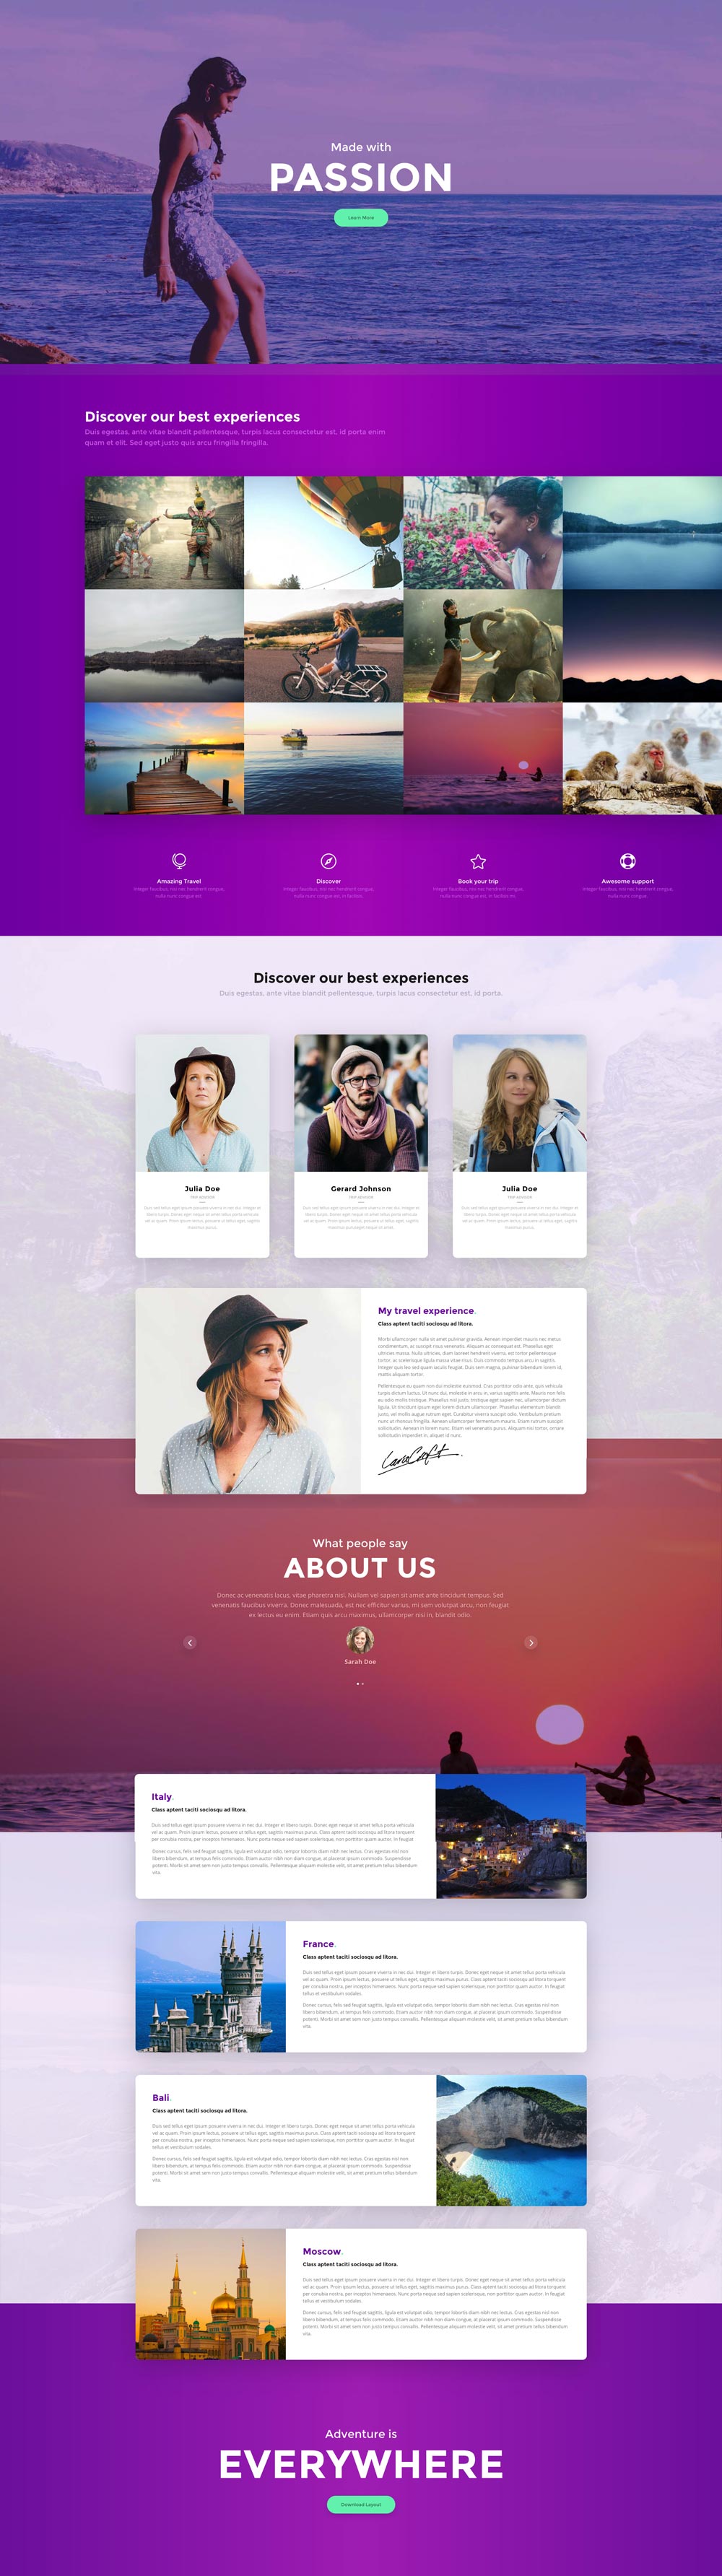 free-divi-layouts-2018-hostly-free-divi-layout-pack-for-a-hosting